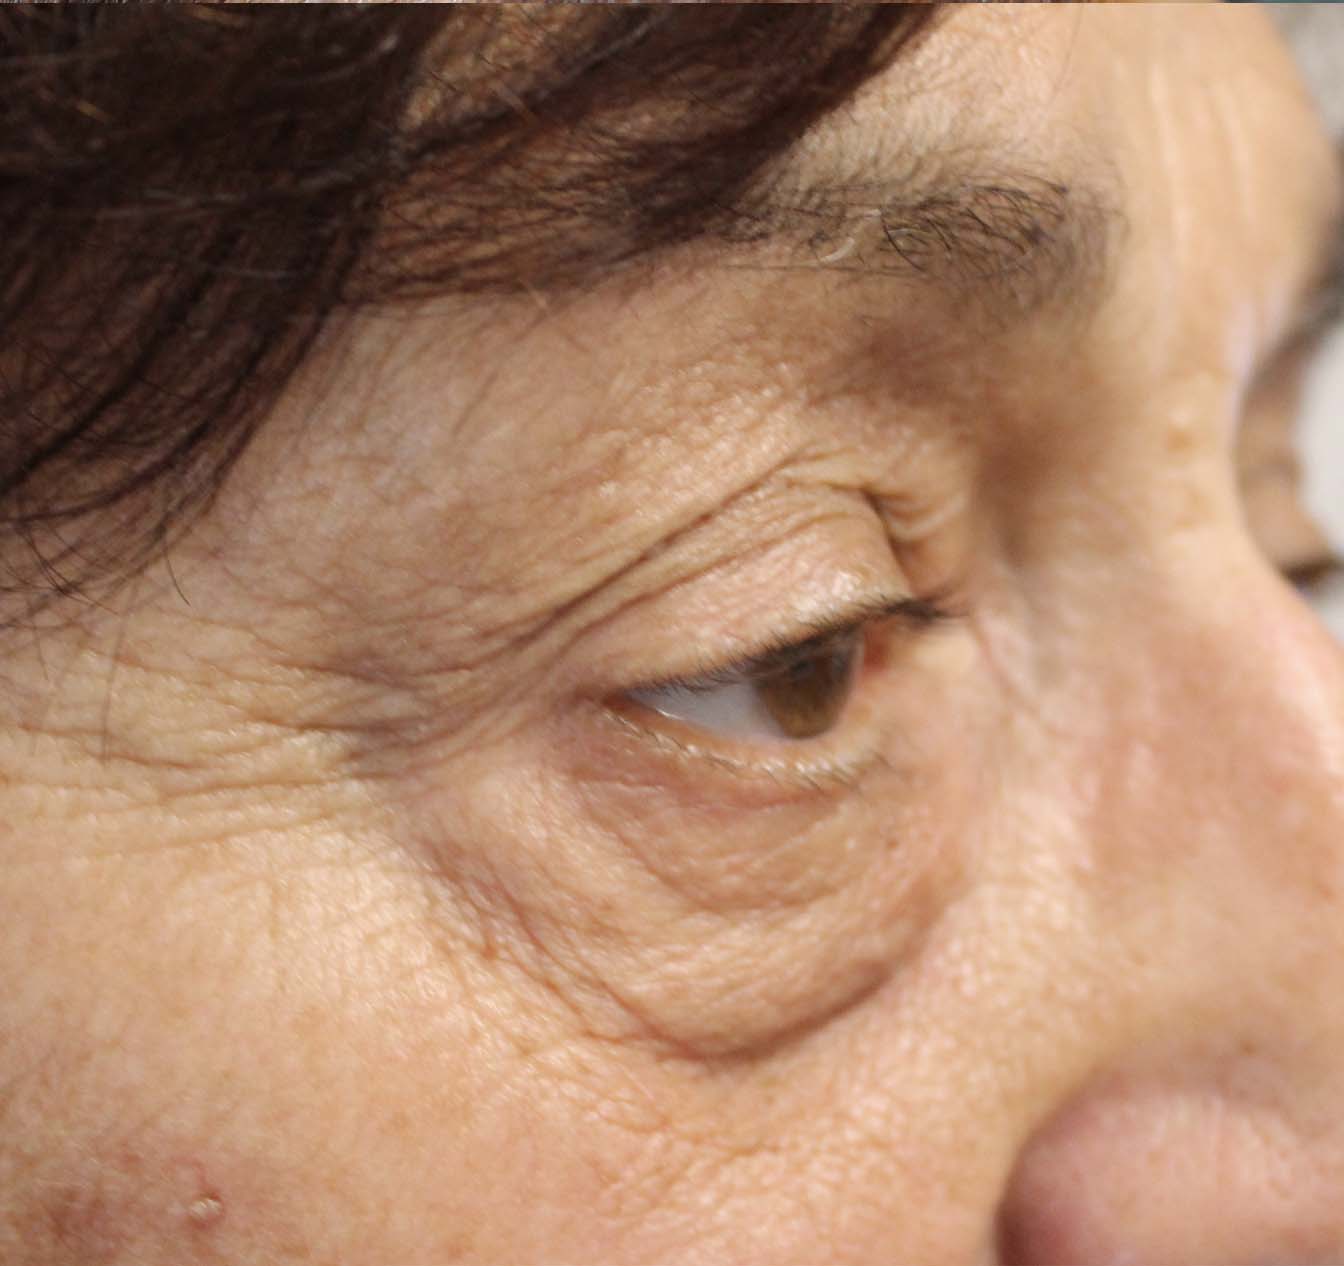 before ptosis eye surgery on woman 70 years old